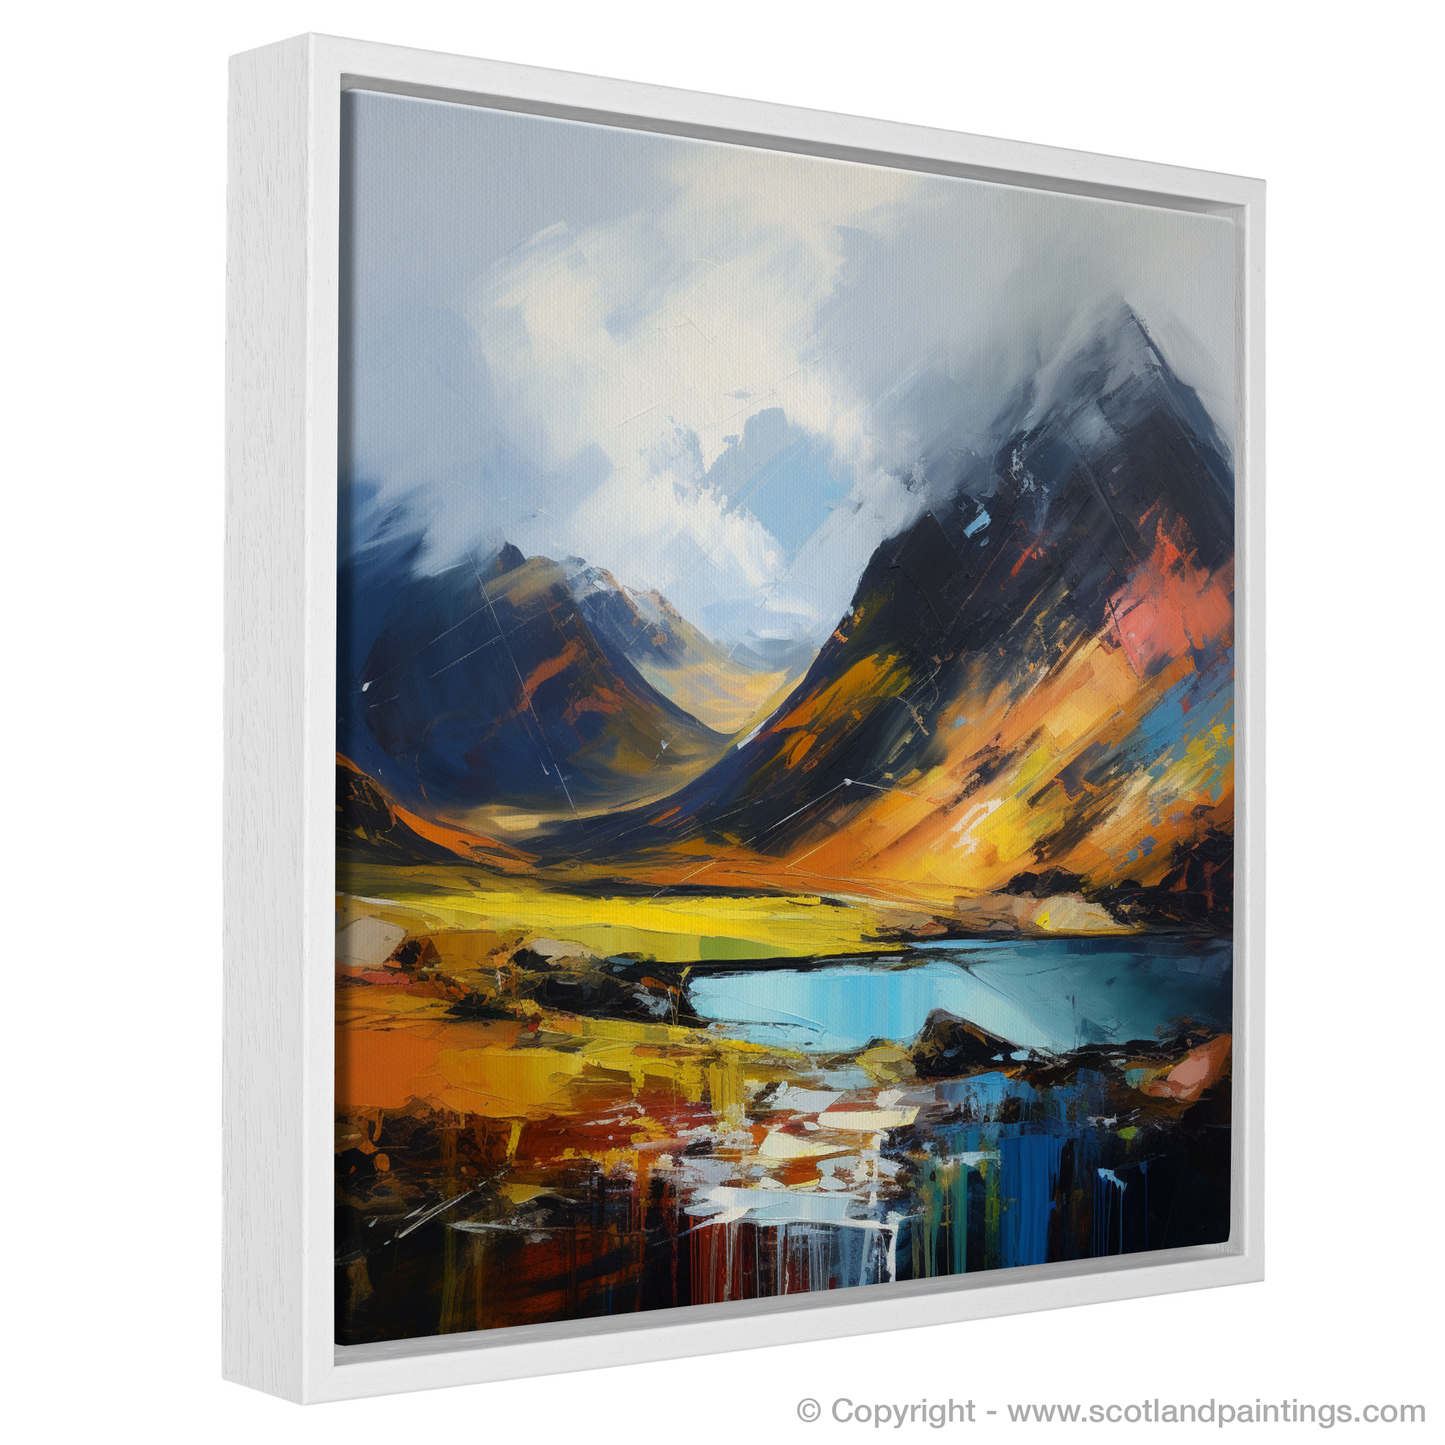 Painting and Art Print of Beinn Narnain entitled "Beinn Narnain Unleashed: An Expressionist Homage to the Scottish Highlands".